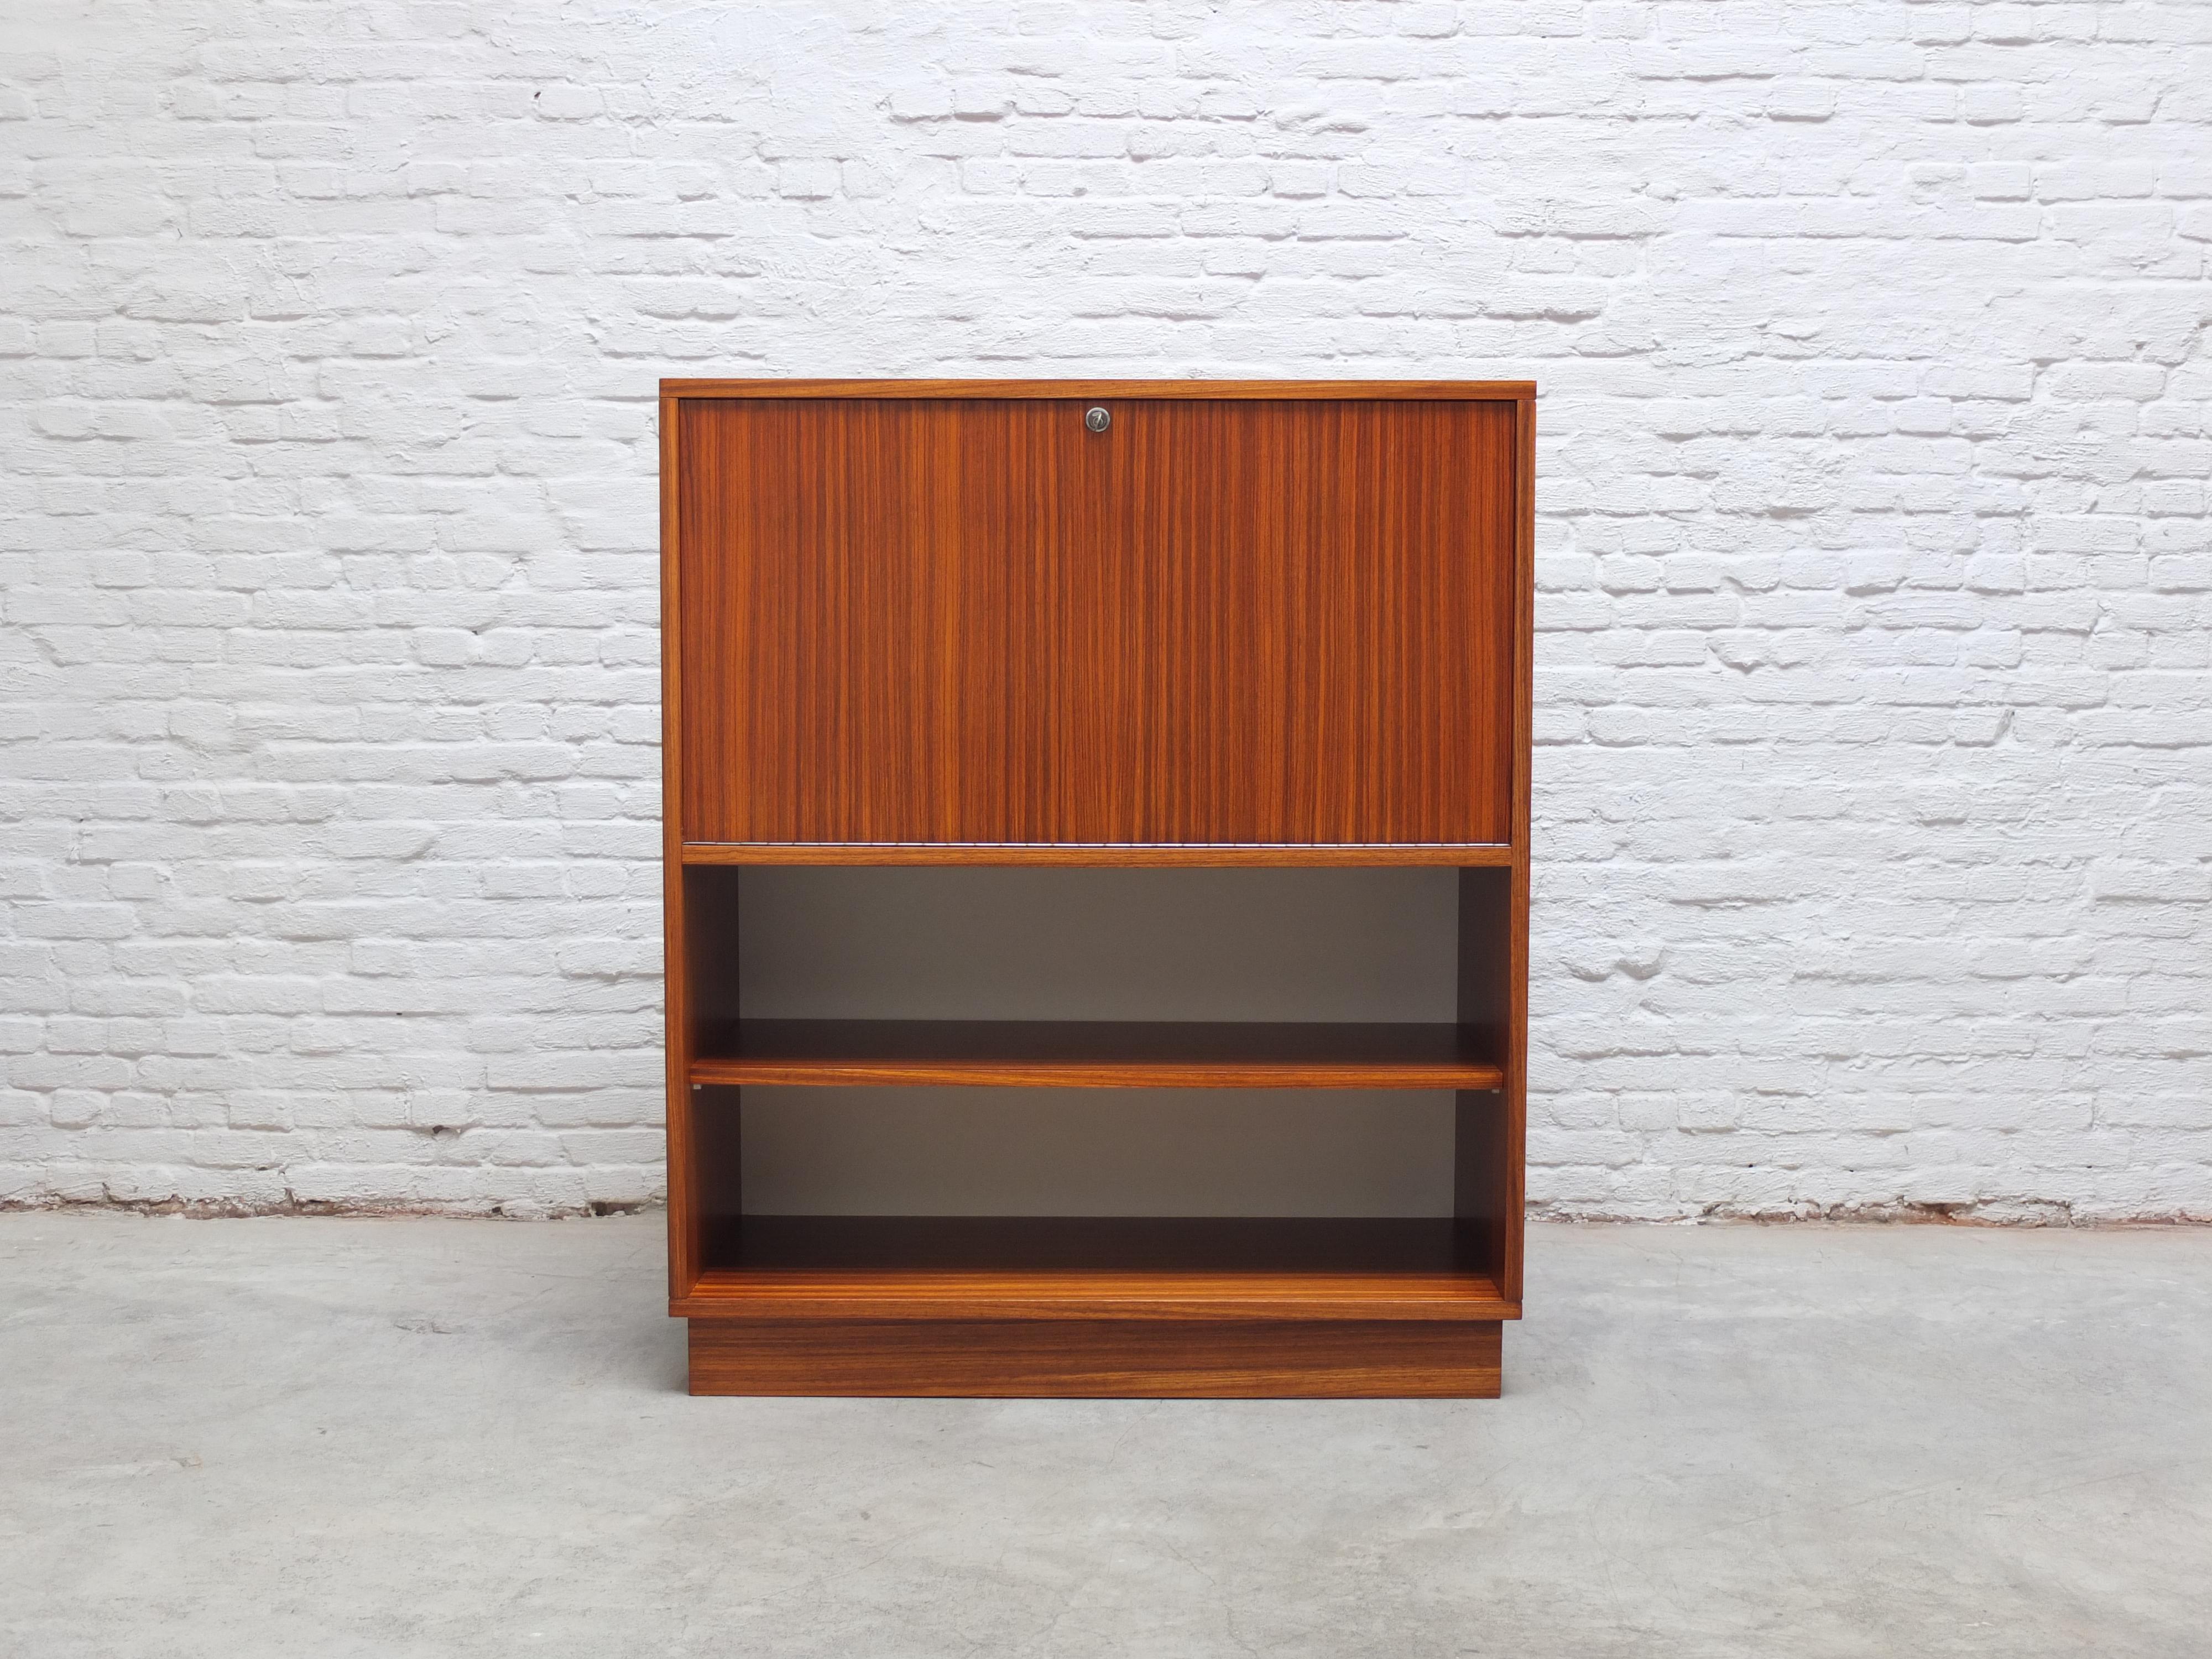 Rare secretary cabinet designed by Belgian modernist designer Alfred Hendrickx for Belform, 1960s. Finished in a decorative Zebrano (or Zingana) wood veneer and standing on a rectangular wooden base. In mint restored condition and comes with one